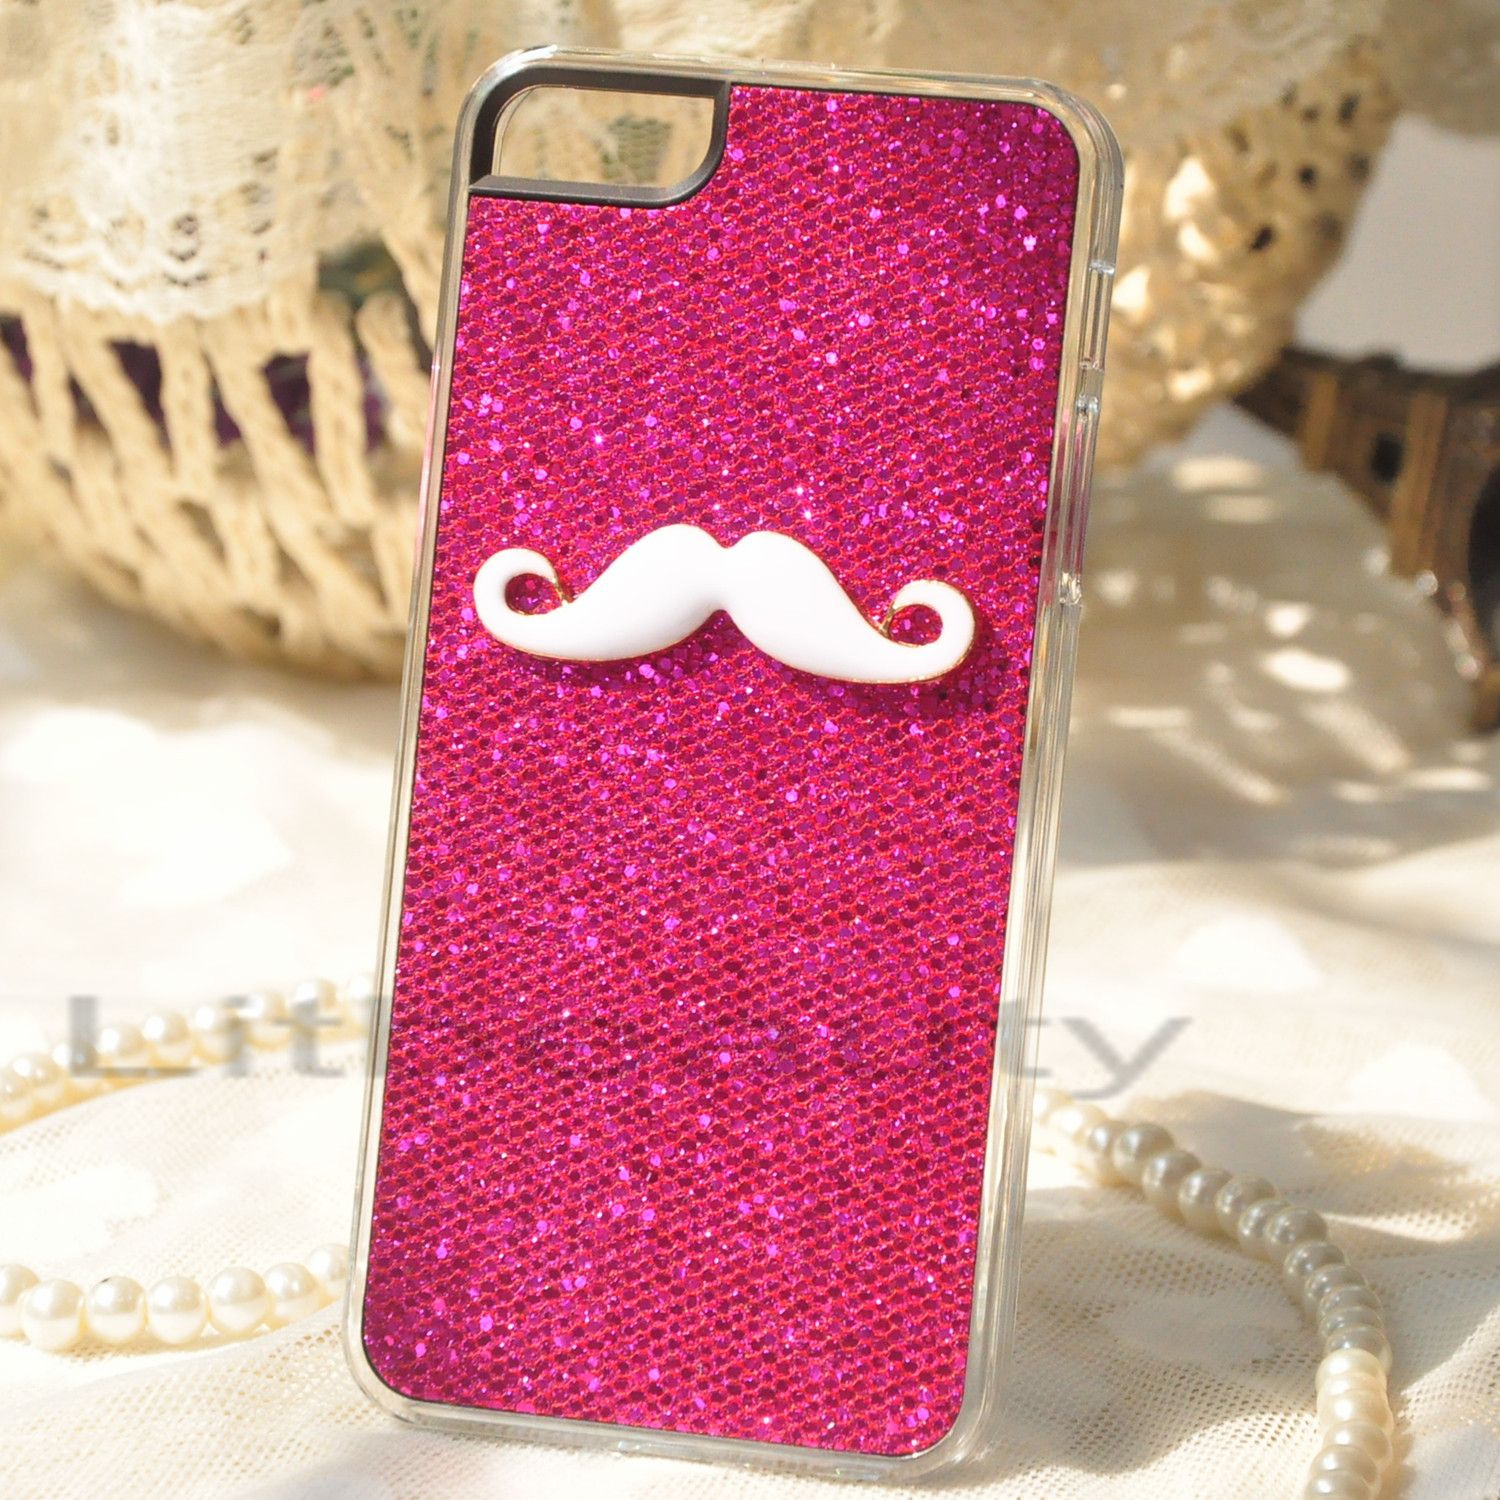 Pcs Rose & Silver Bling Mustache Case Cover For iPhone 5 5TH Couple 